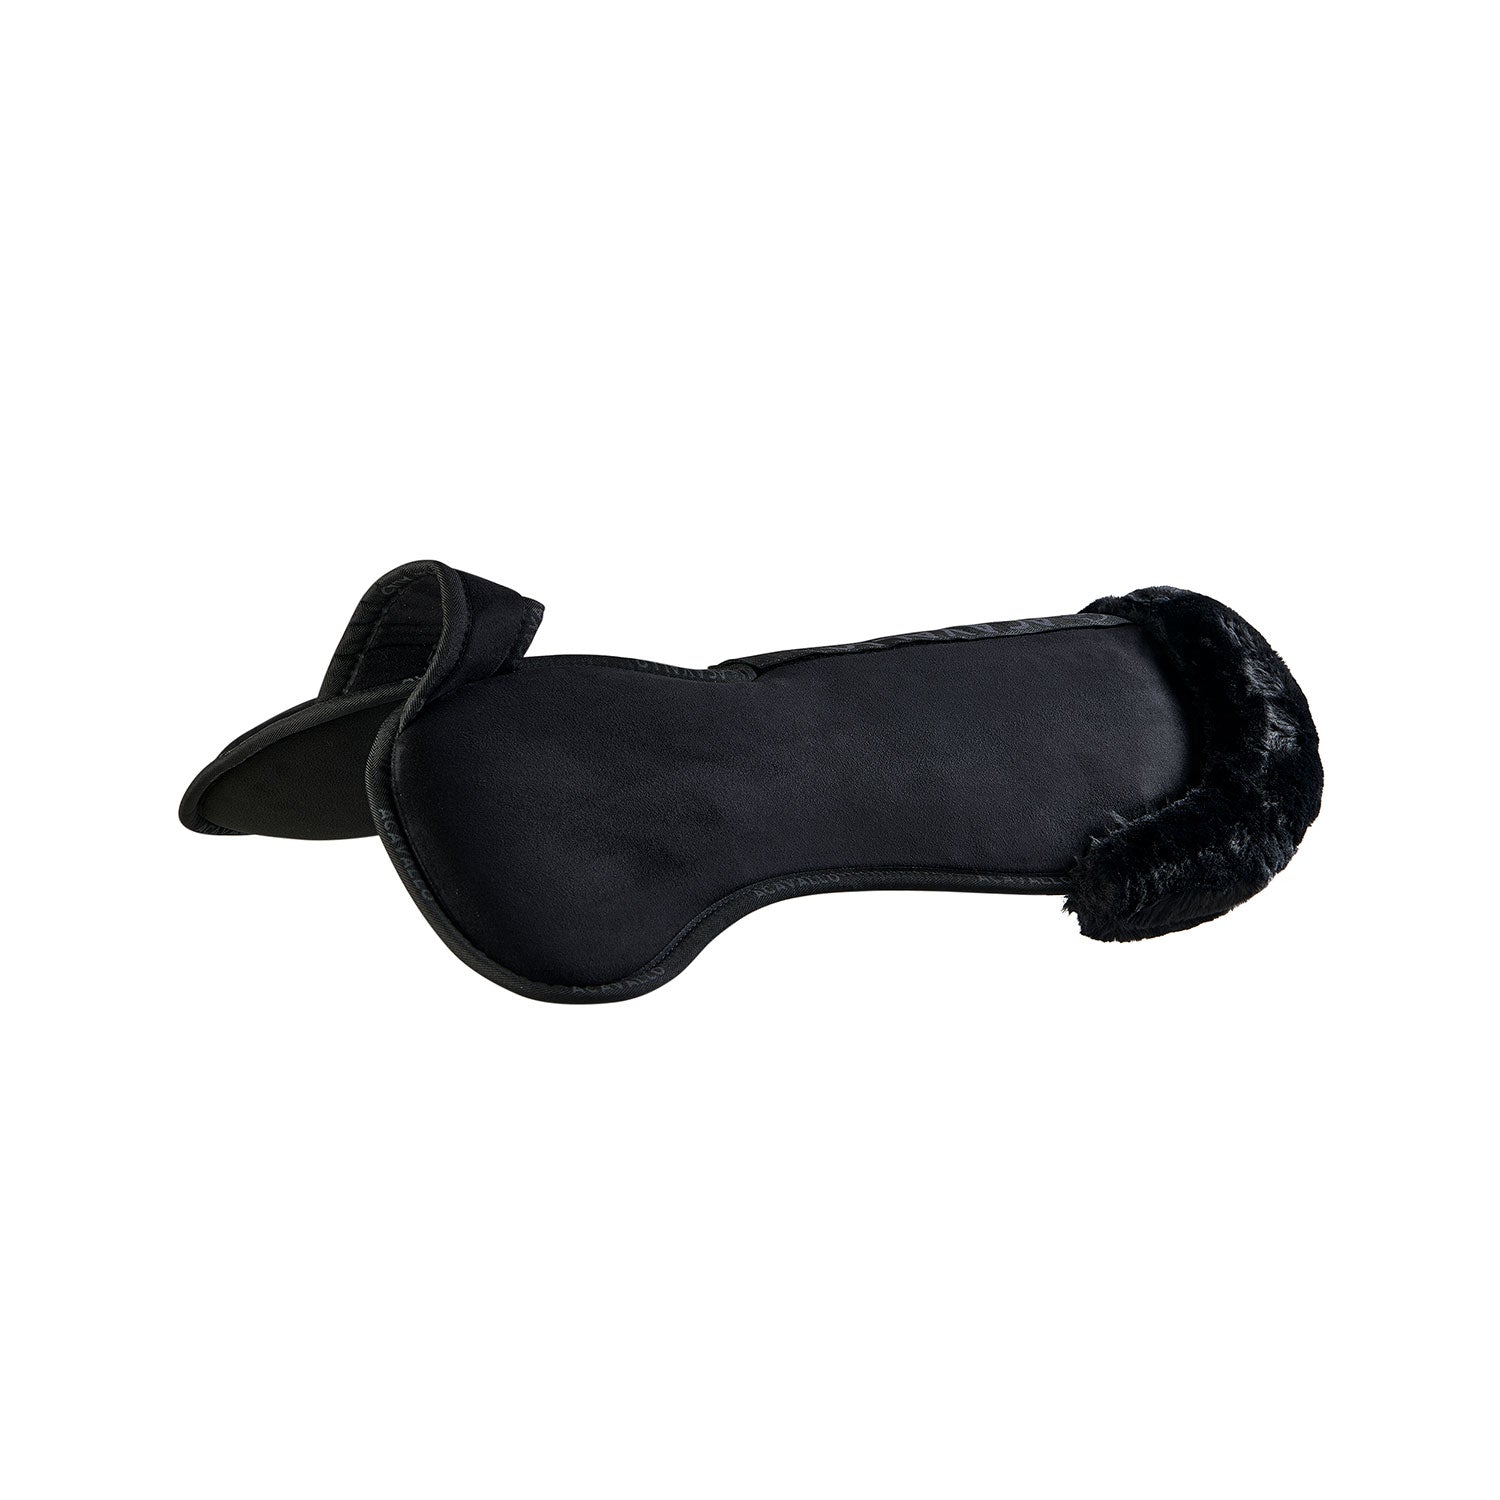 Pad WITHERS FREE POCKET CONFIGURATION PAD WITH ECOWOOL WITH PIUMA BACK RISER - Reitstiefel Kandel - Dein Reitshop